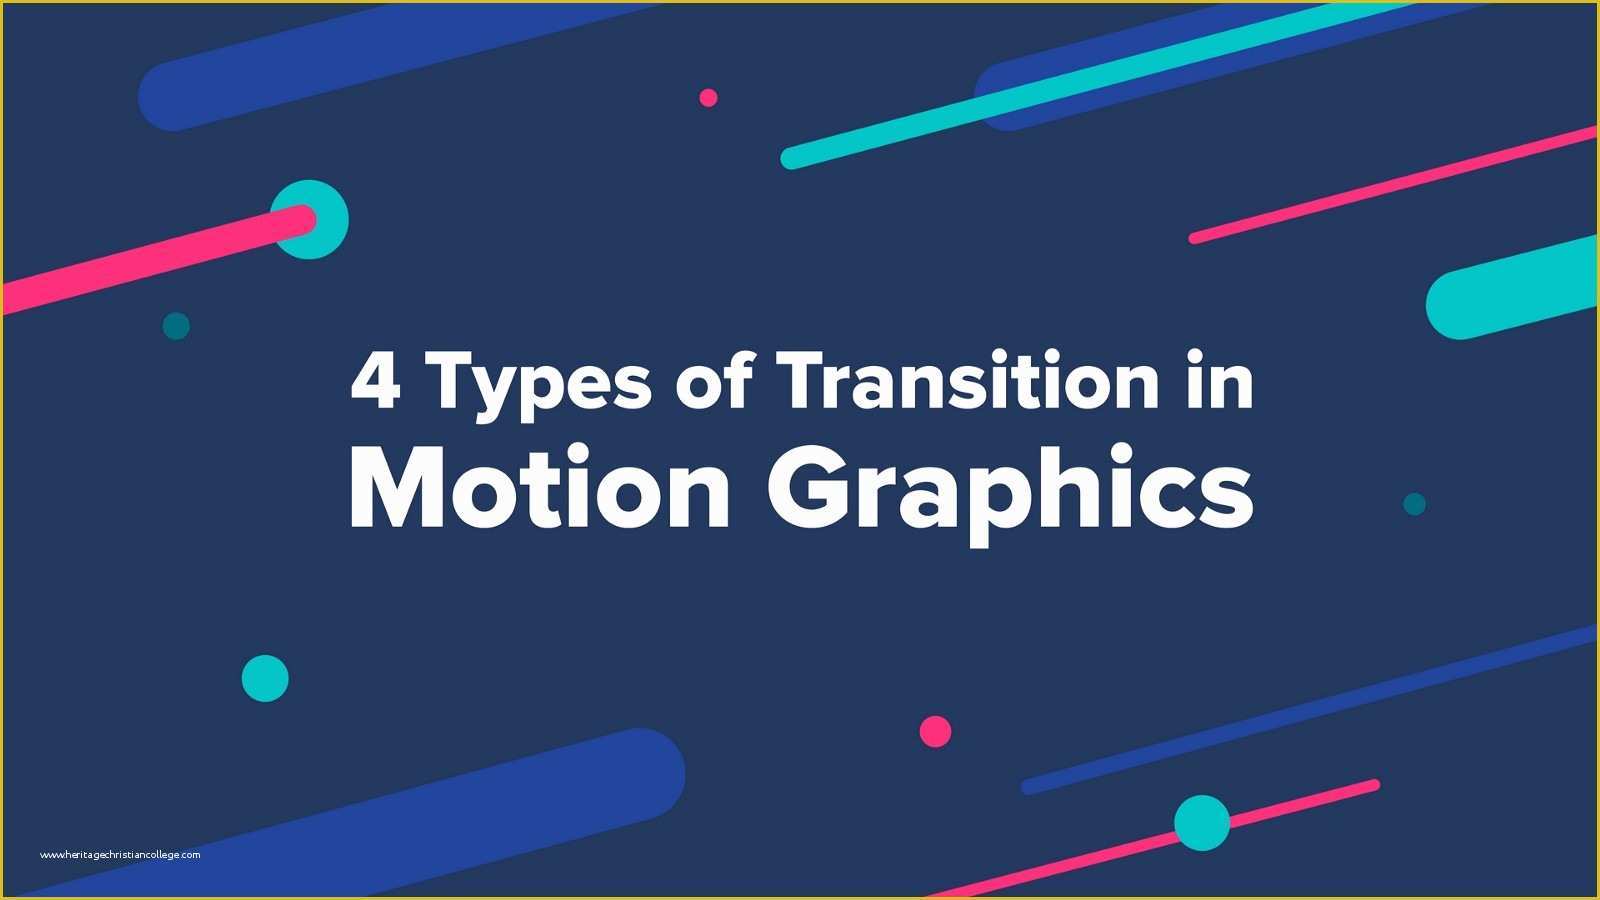 Free Motion Graphics Templates Of 4 Types Of Transition In Motion Graphics – Muzli Design